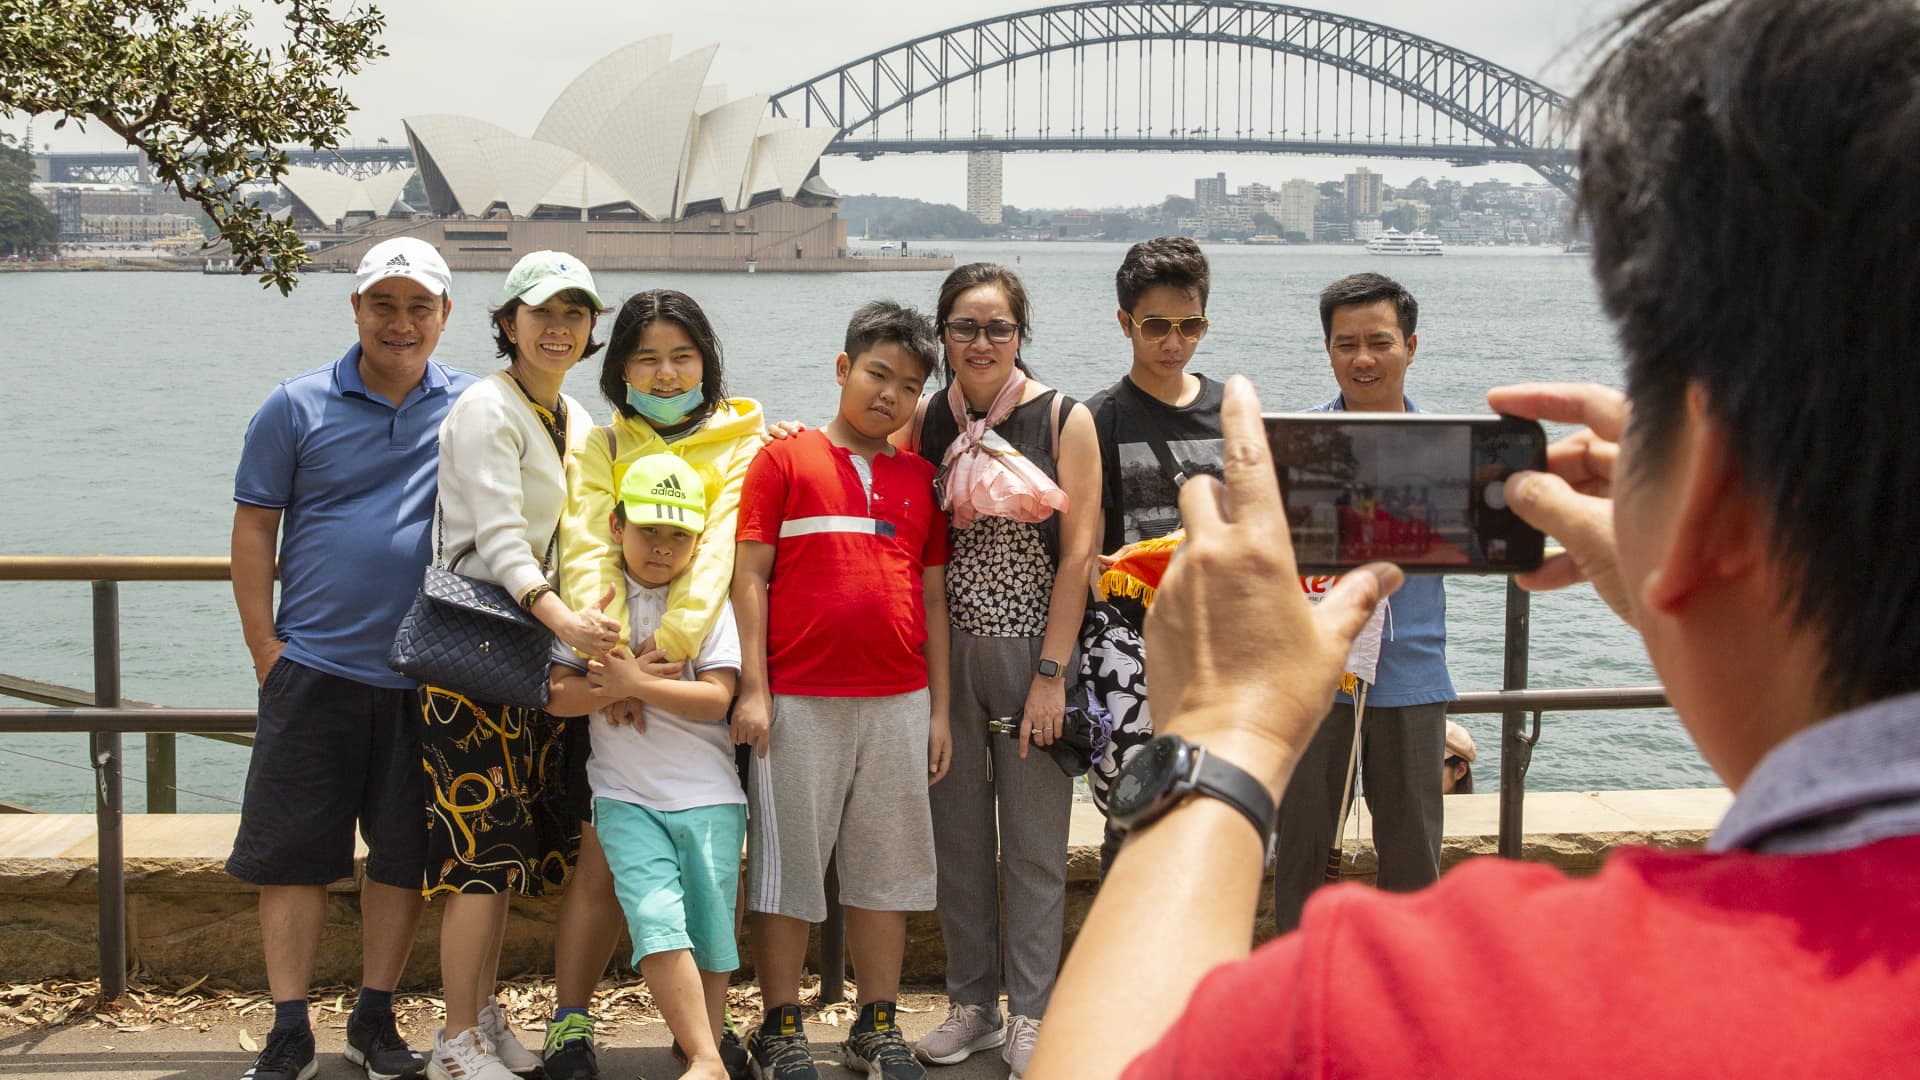 Tourists at Mrs Macquarie's Chair on Jan. 29, 2020 in Sydney, Australia. In 2019, China accounted for 15.3% of all of Australia's inbound tourism, making it the largest source of short-term visitors, JPMorgan said.